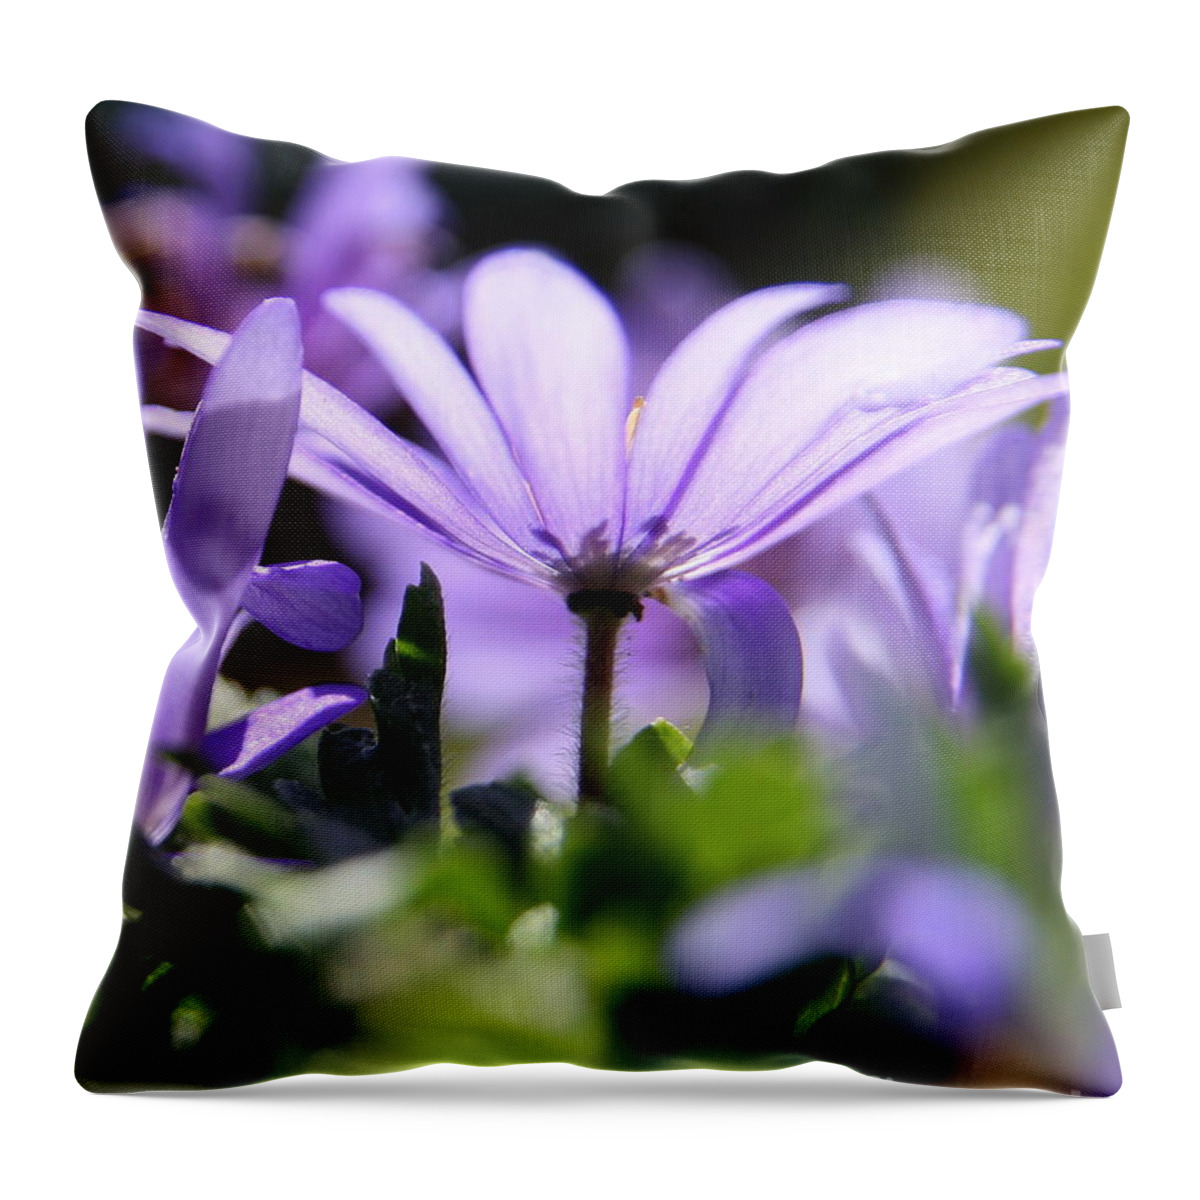 Purple Throw Pillow featuring the photograph Floral Purple Light by Neal Eslinger